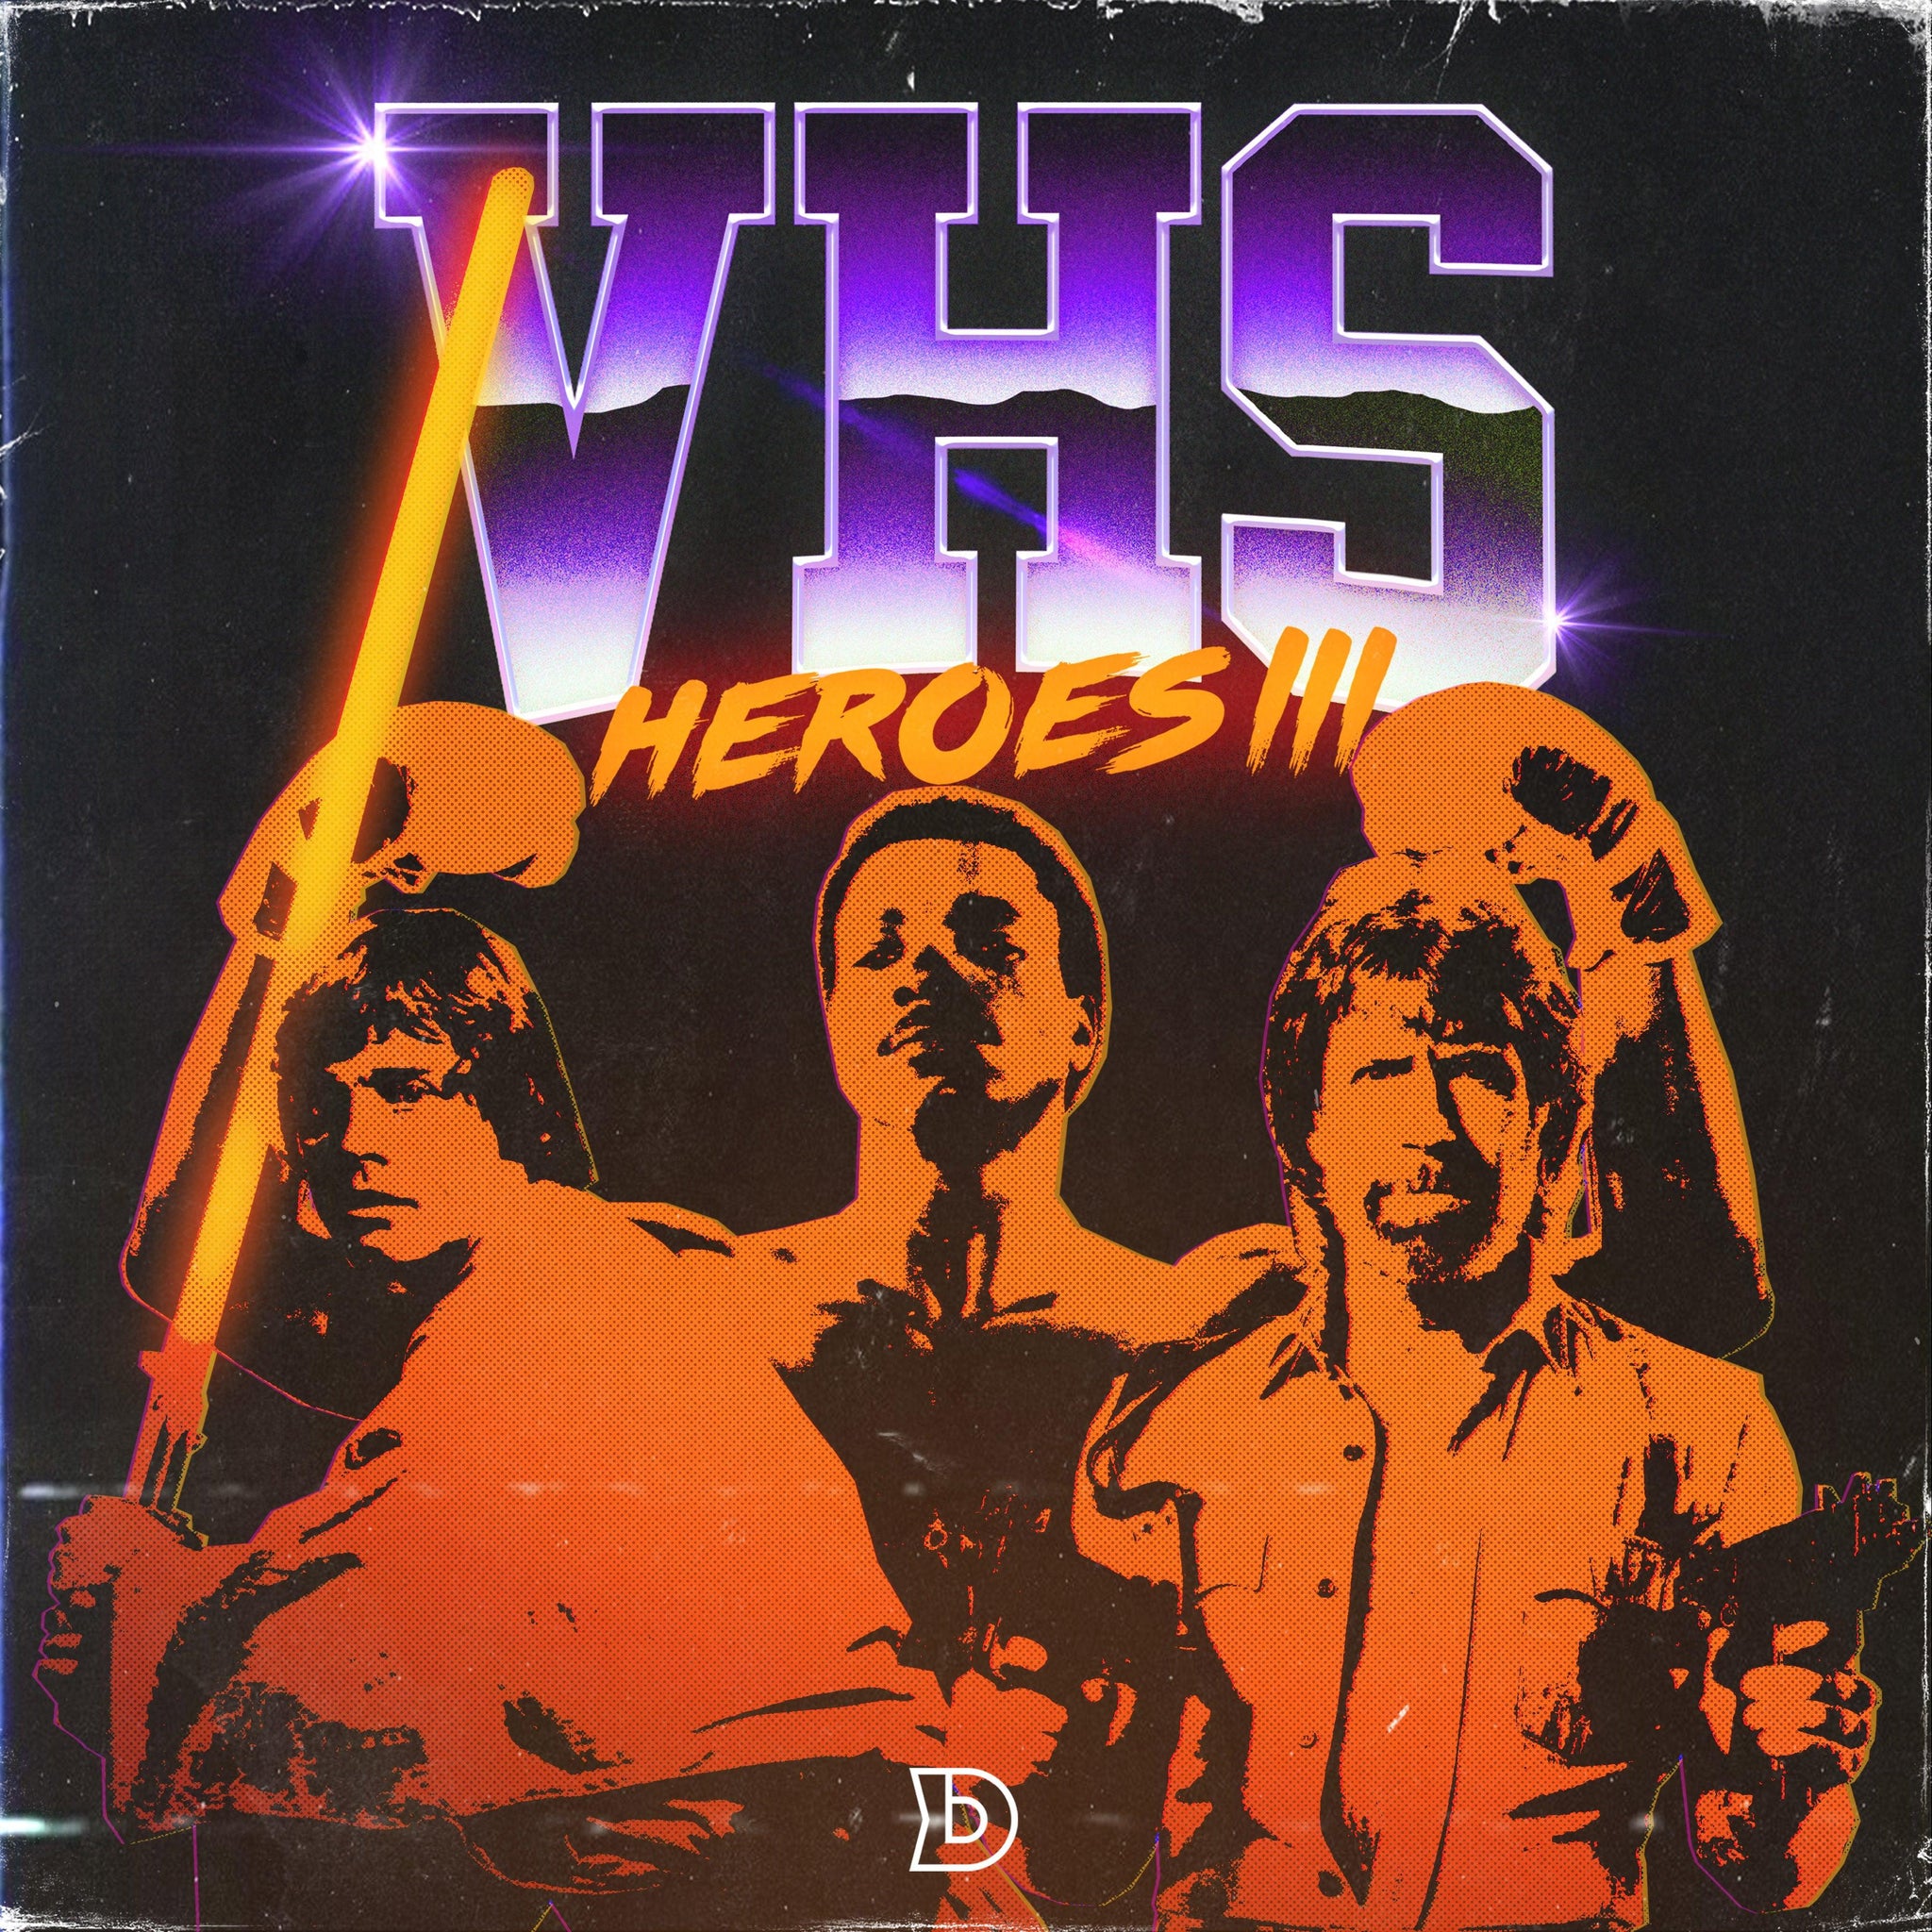 VHS Heroes Vol. 3 - The Sample Lab